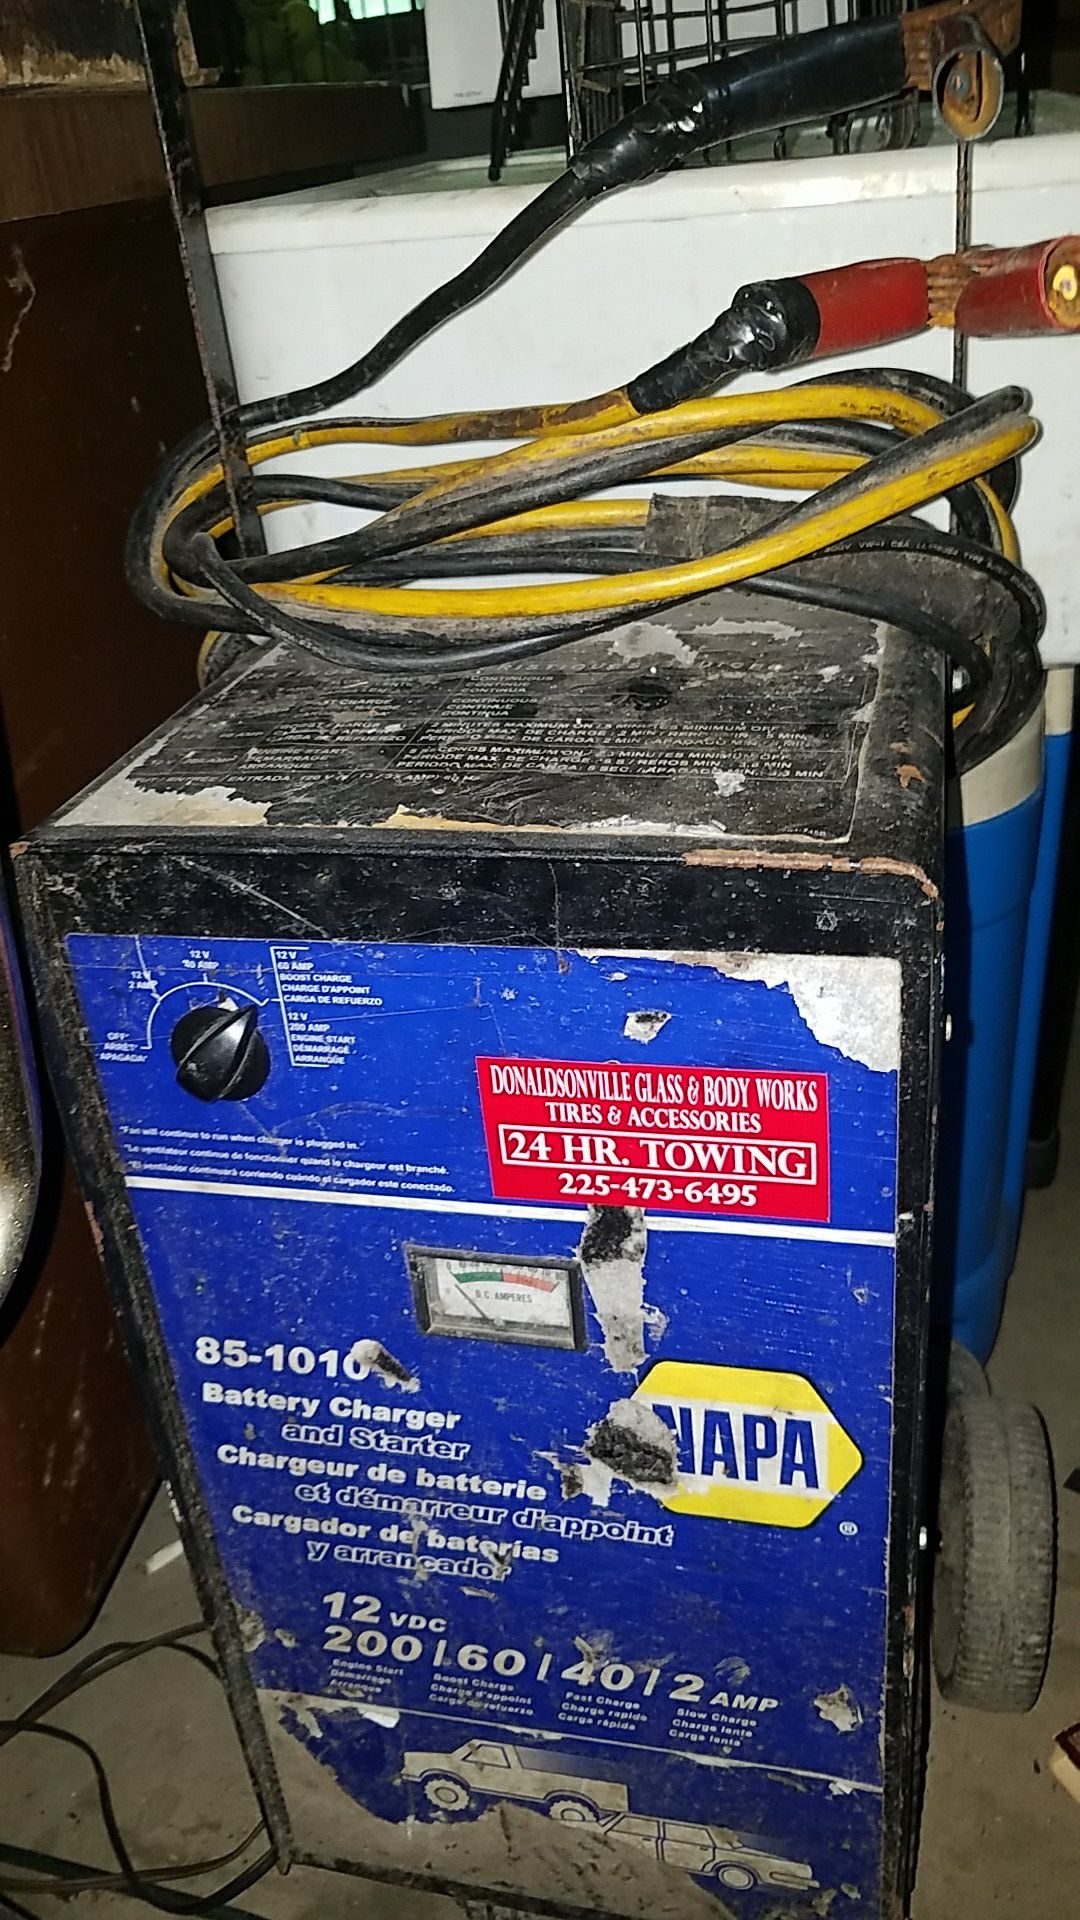 Napa battery charger and starter